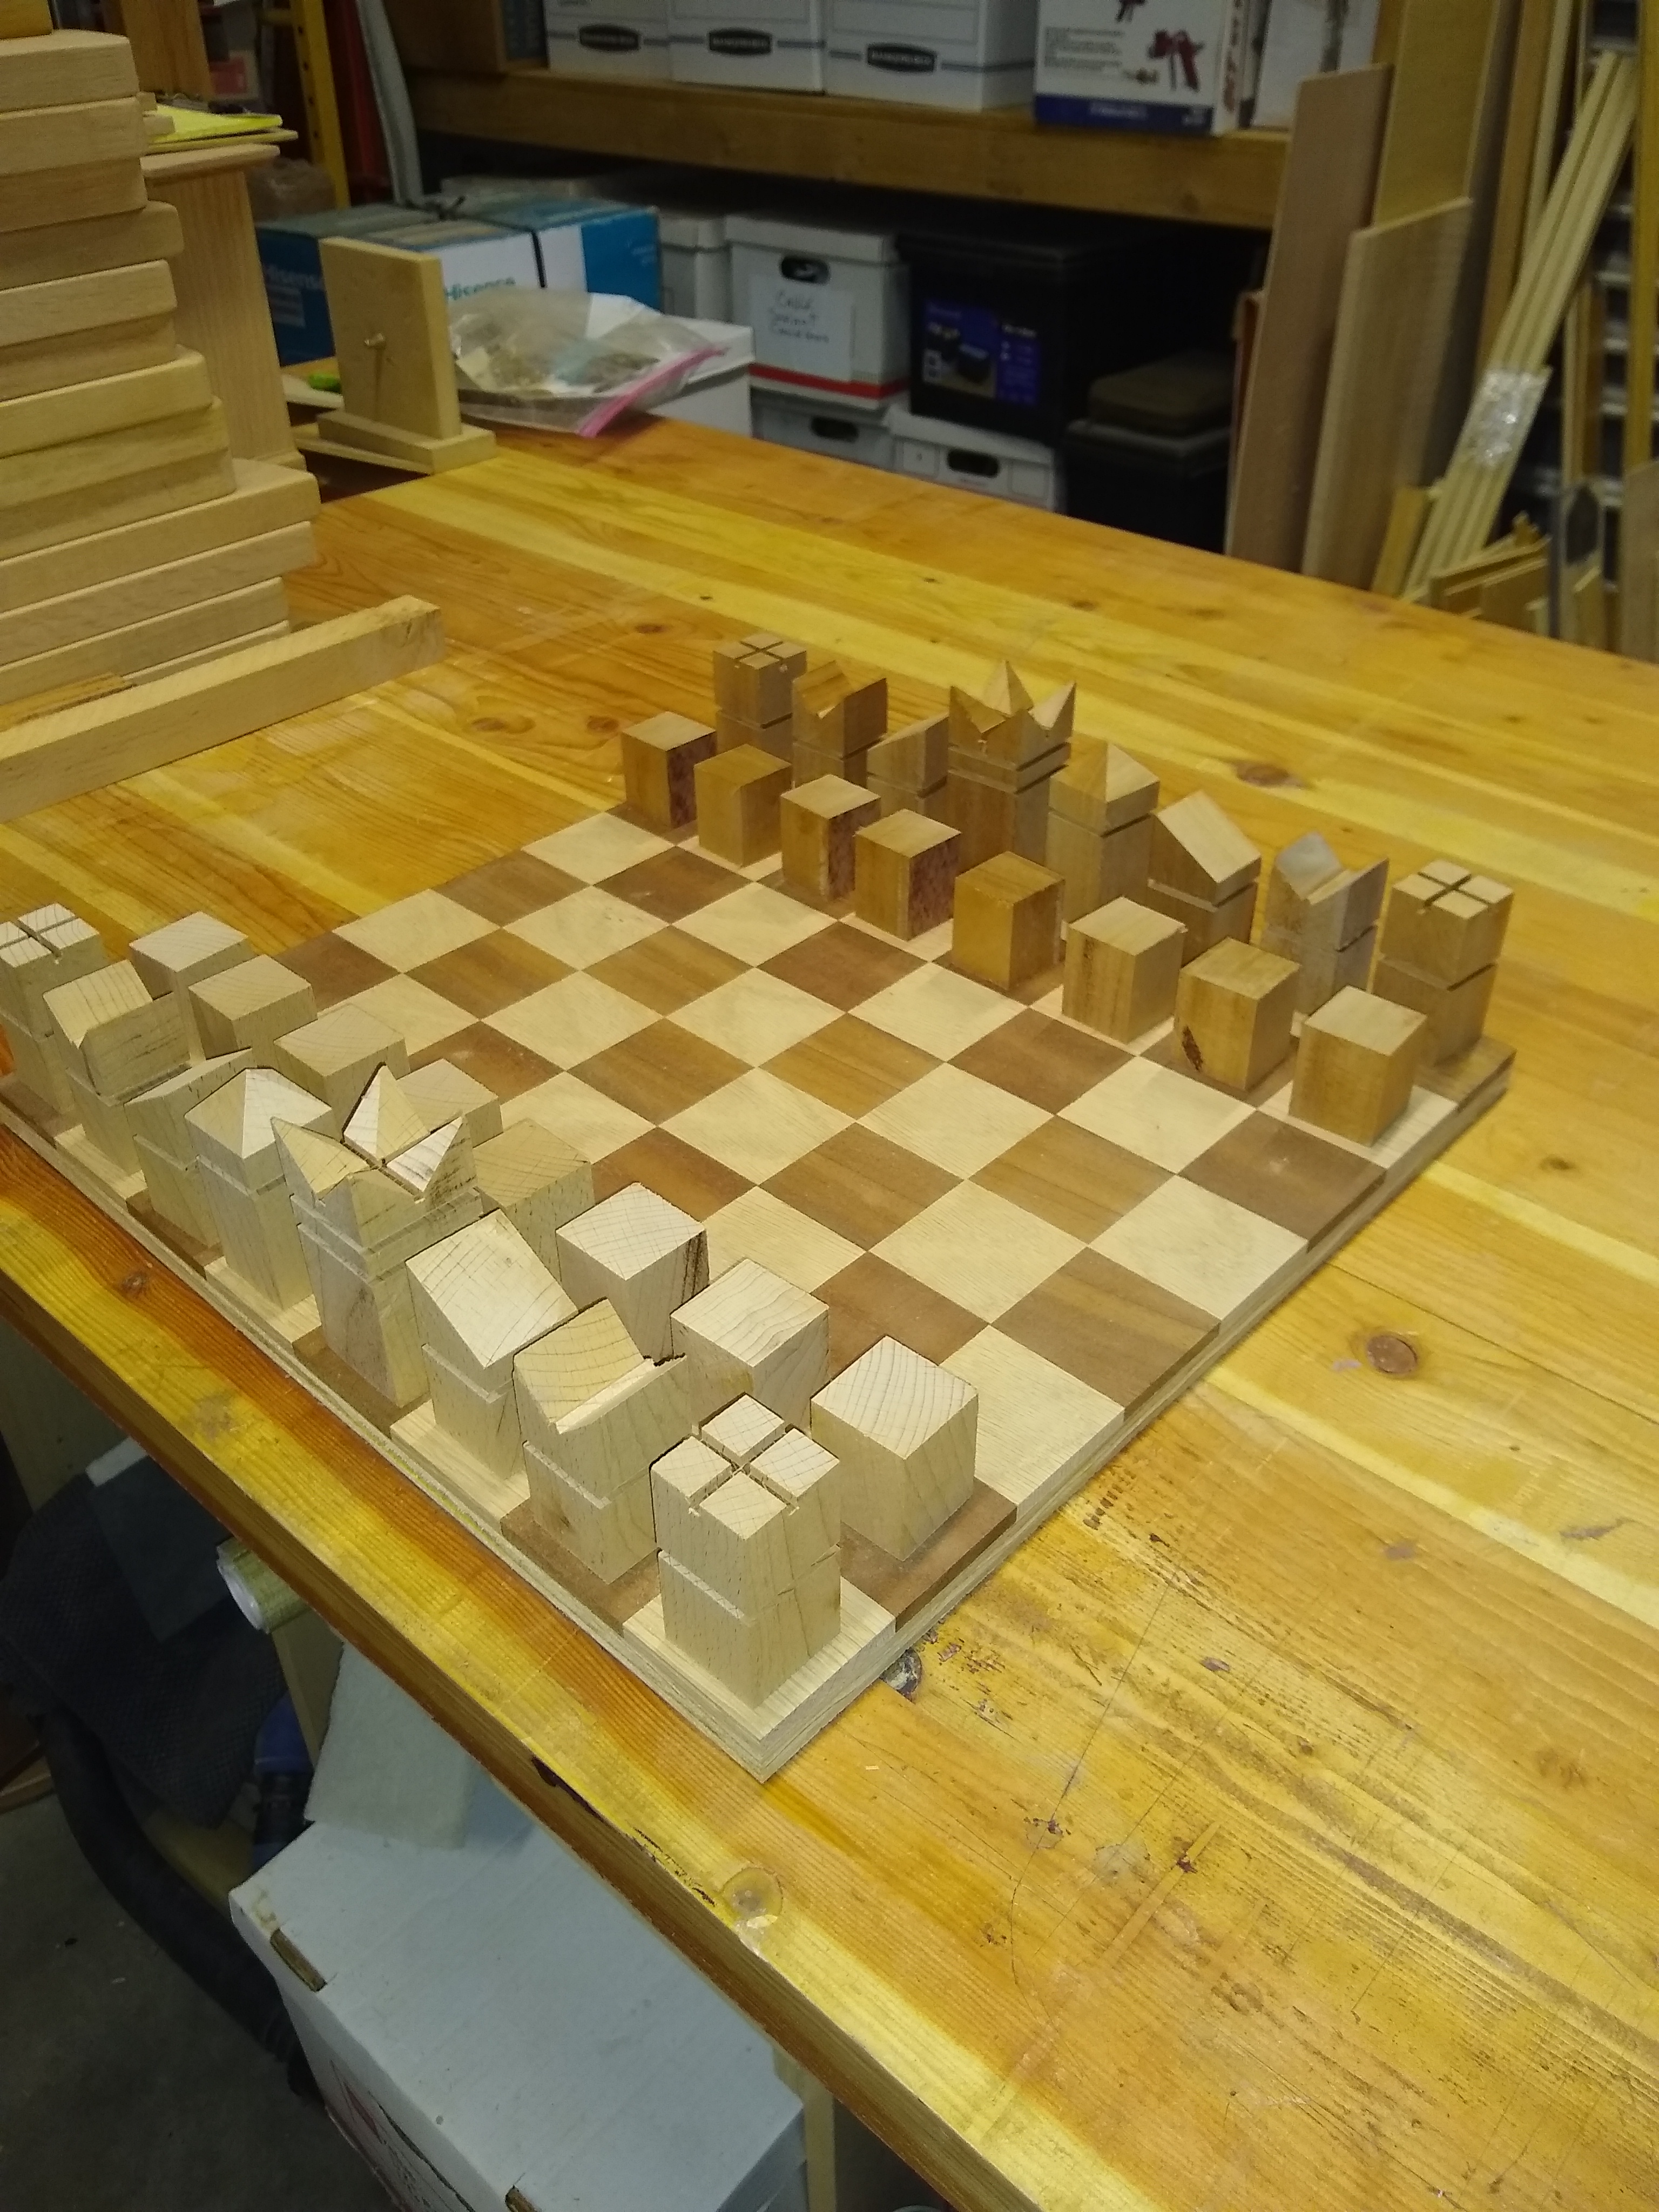 Opions for Chess Set - Gallery - Carbide 3D Community Site